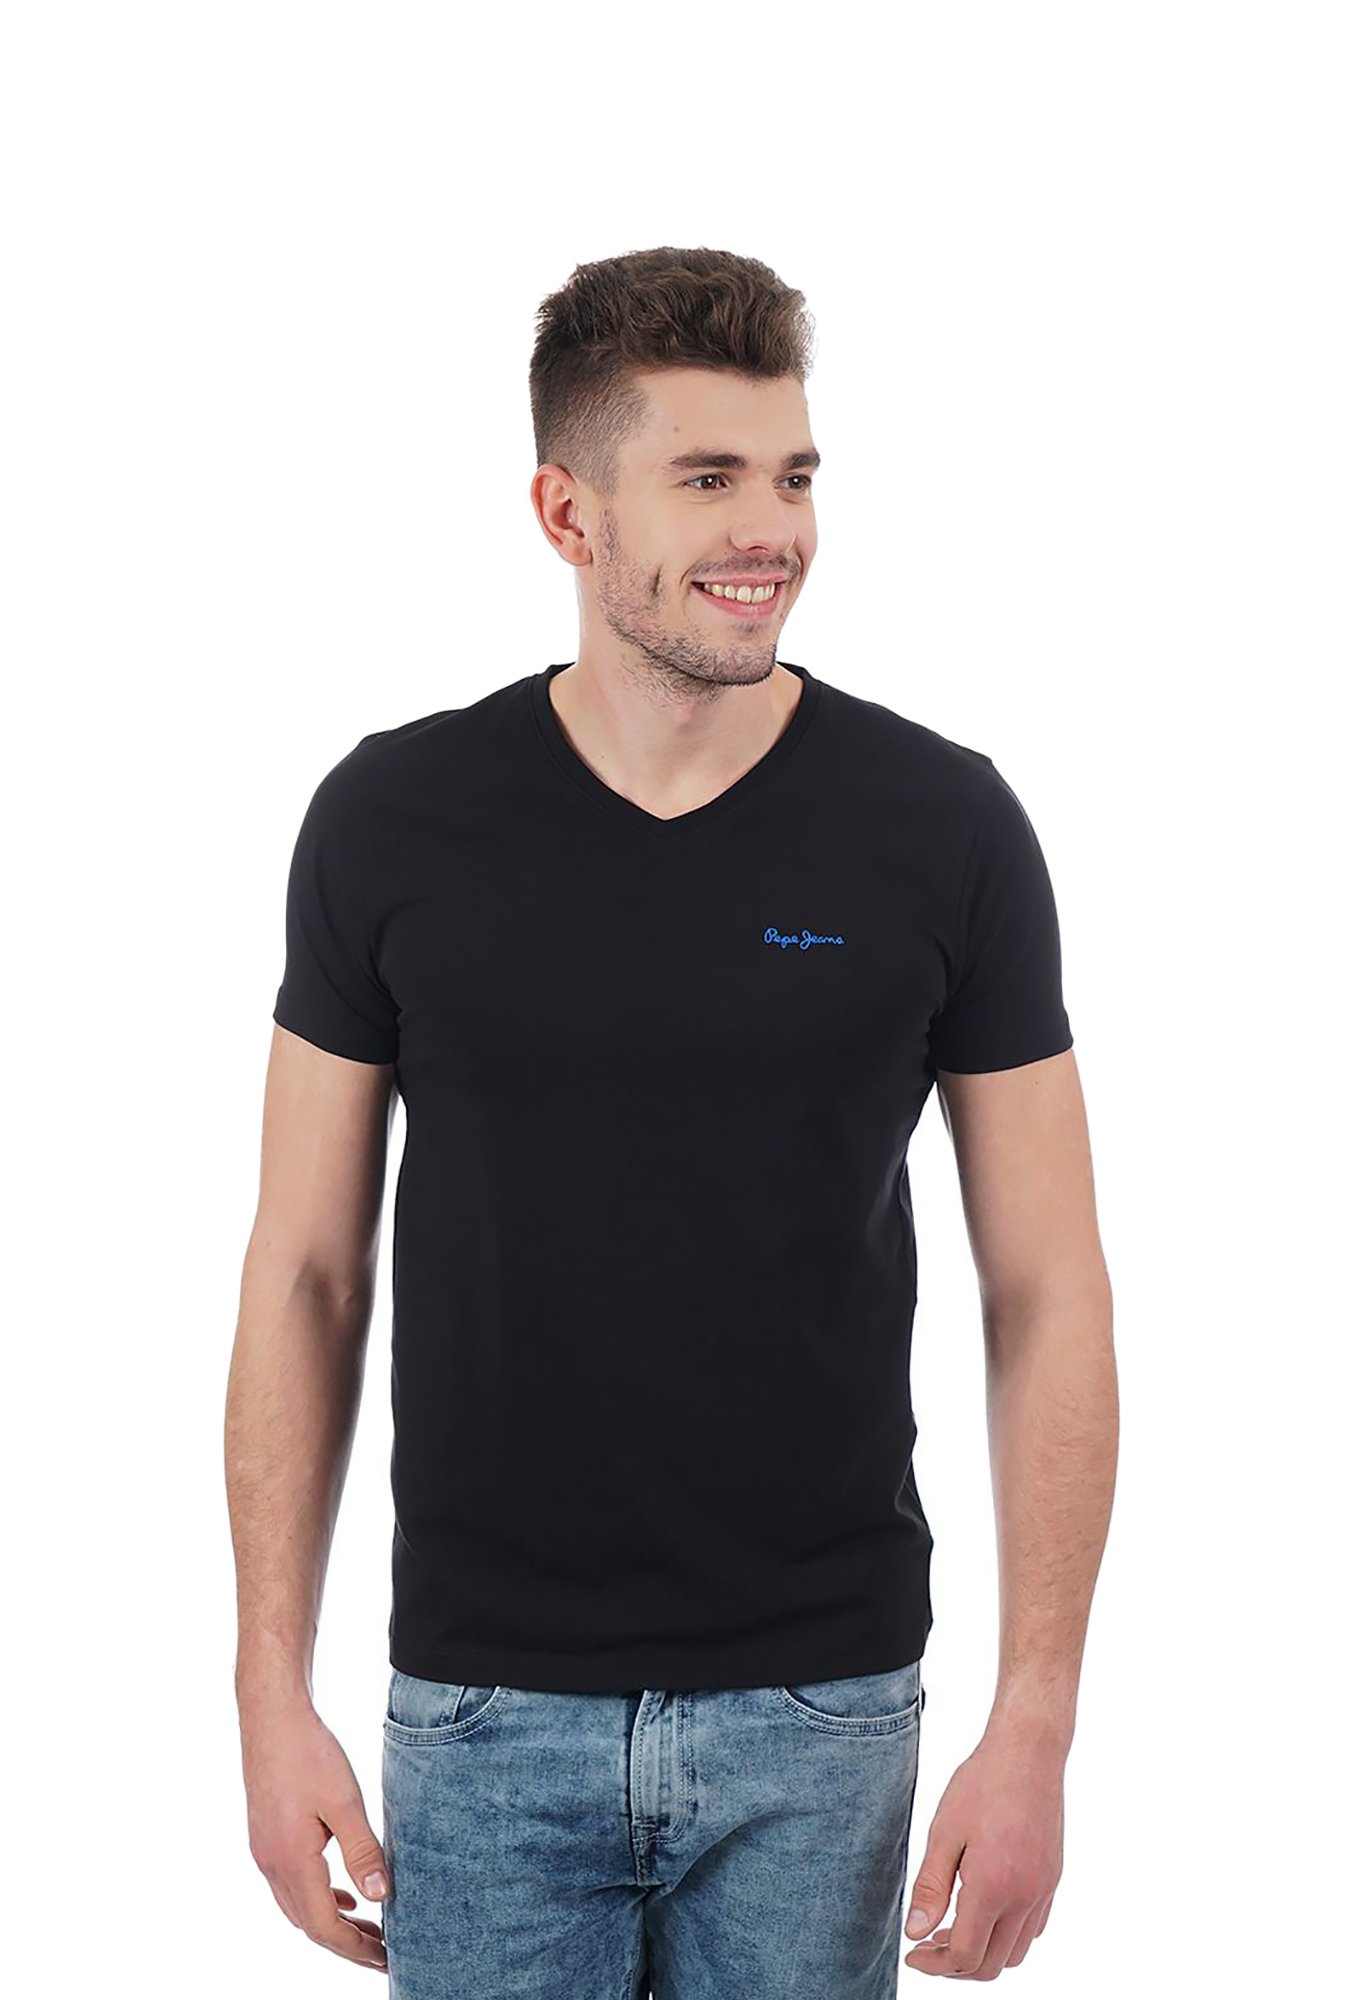 Details more than 149 pepe jeans black shirt best